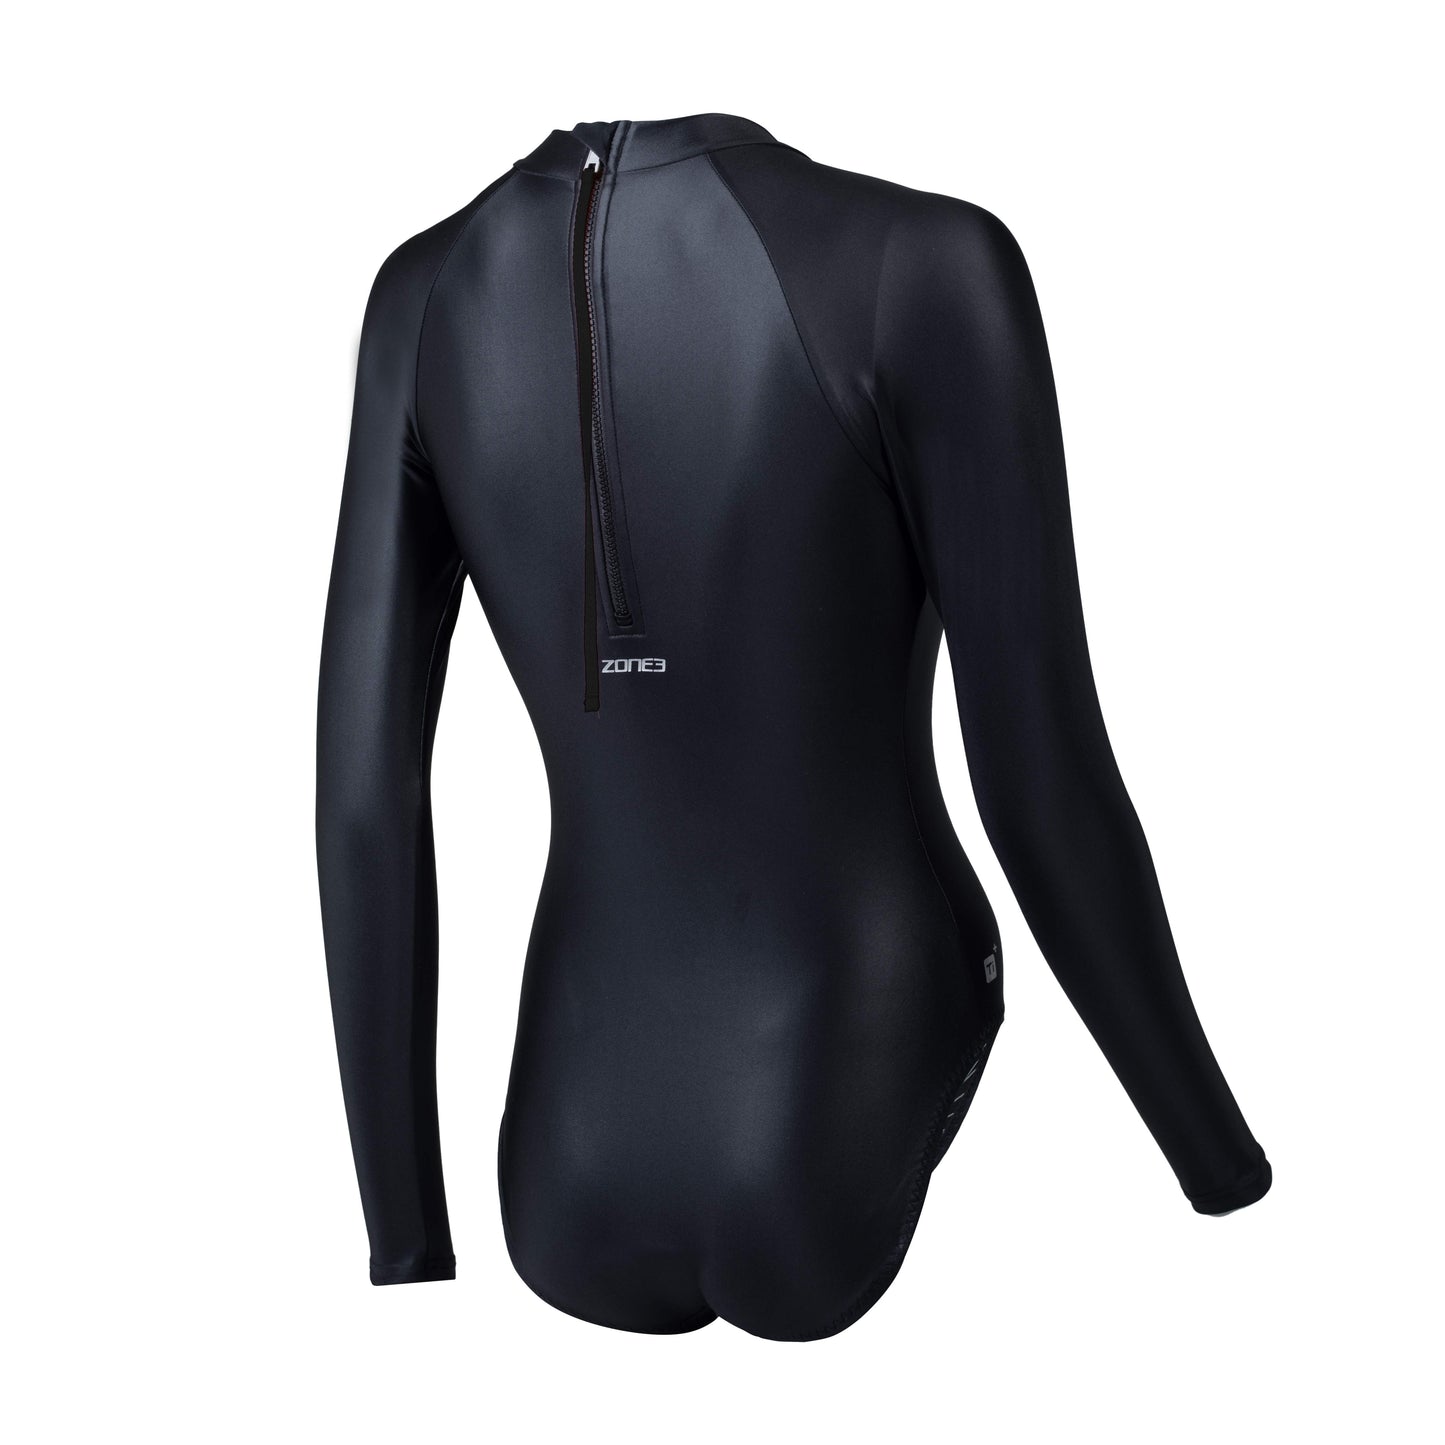 Women's OWS Ti+ Long Sleeve Thermal High Neck Swimsuit